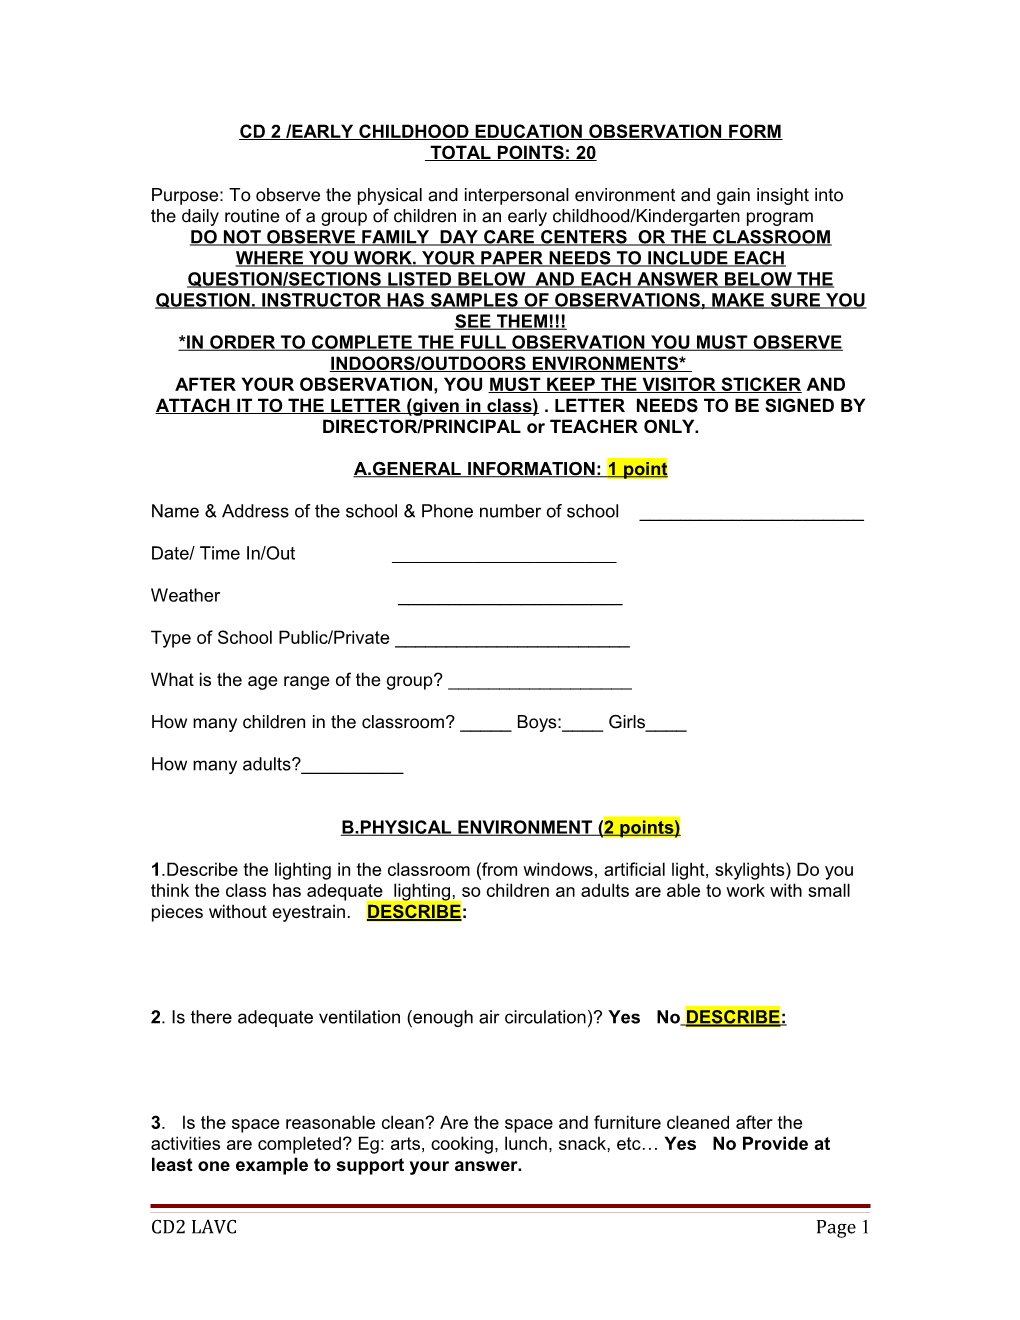 Cd 2 /Early Childhood Education Observation Form